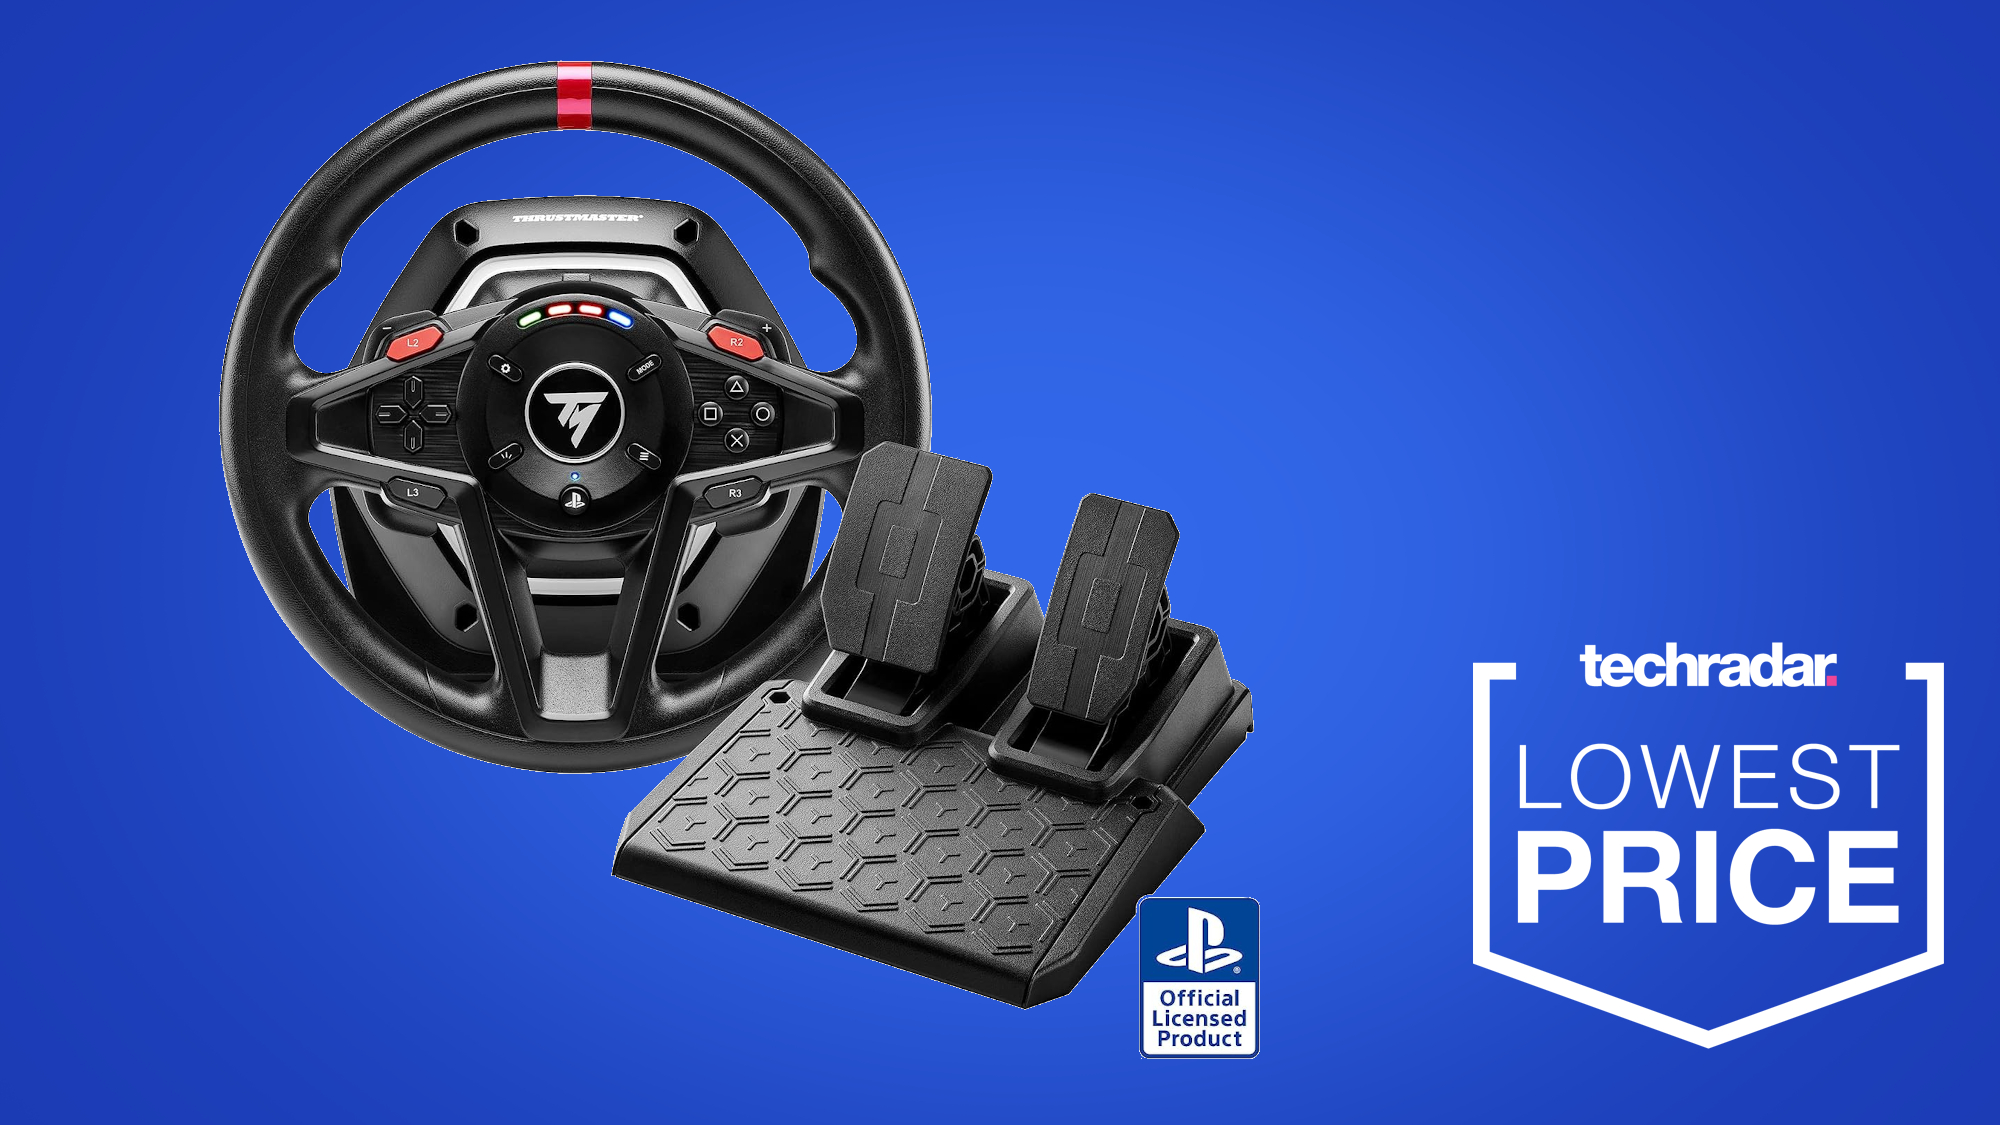 News: Thrustmaster T128 - A preview 